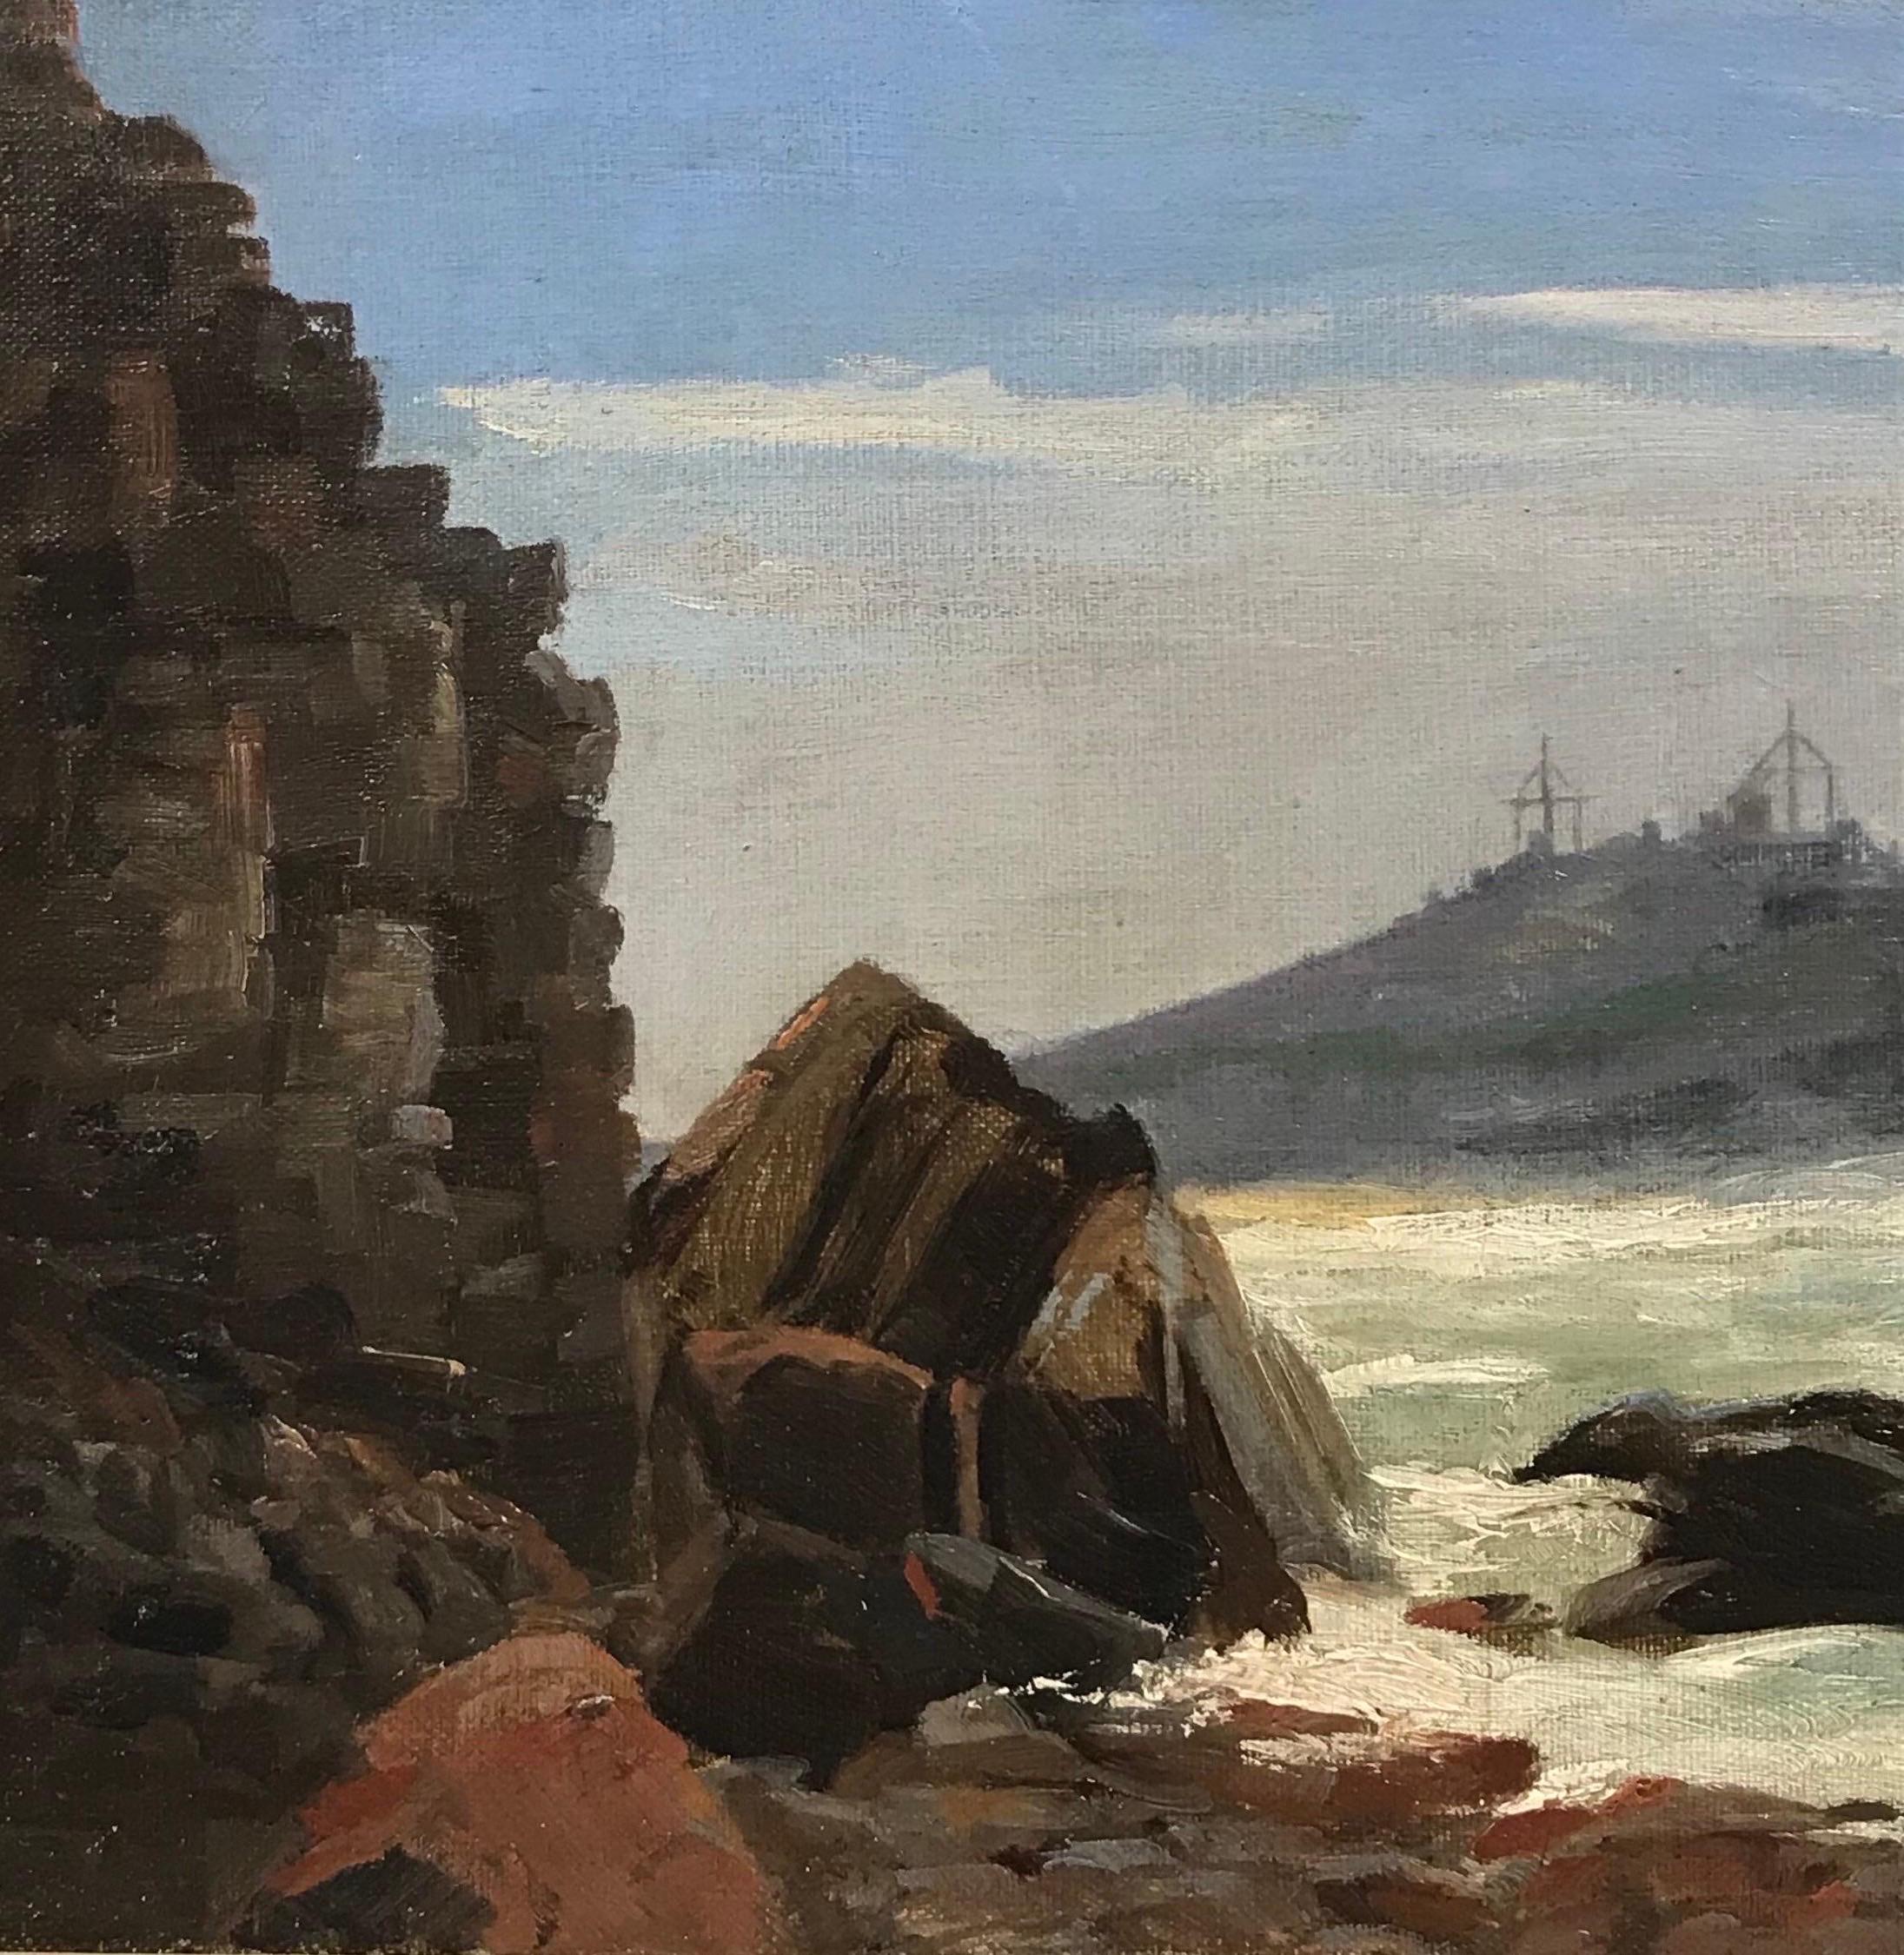 Cornish Coastal Seascape with Tin Mines overlooking Cliffs, signed English Oil - Gray Landscape Painting by 1920's Cornish